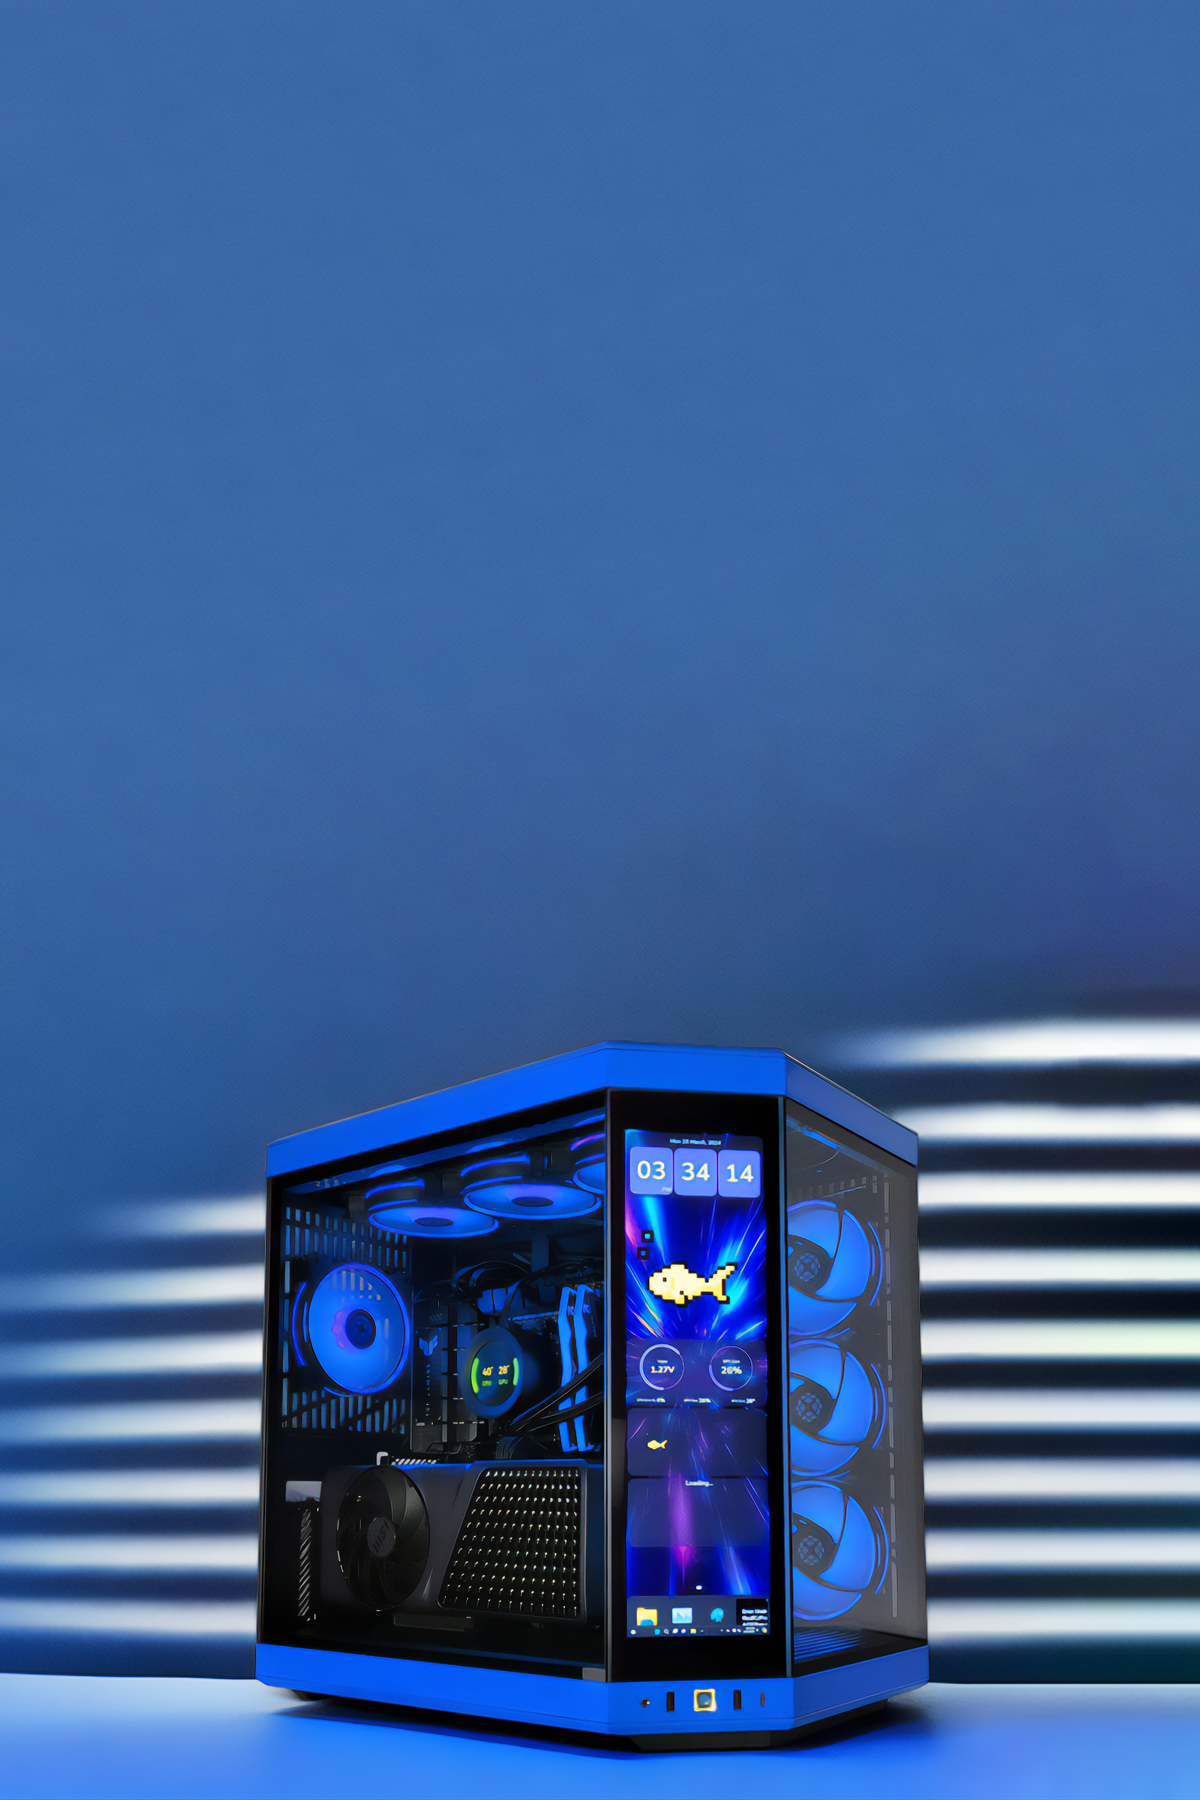 The image showcases a high-end gaming PC with a transparent case illuminated by blue LED lights. The interior components are clearly visible, including multiple fans, a large graphics card, and a CPU cooler. The front panel features an integrated display showing system metrics, time, and an animated fish. The background is a gradient of blue tones, giving the entire setup a futuristic and sleek appearance.